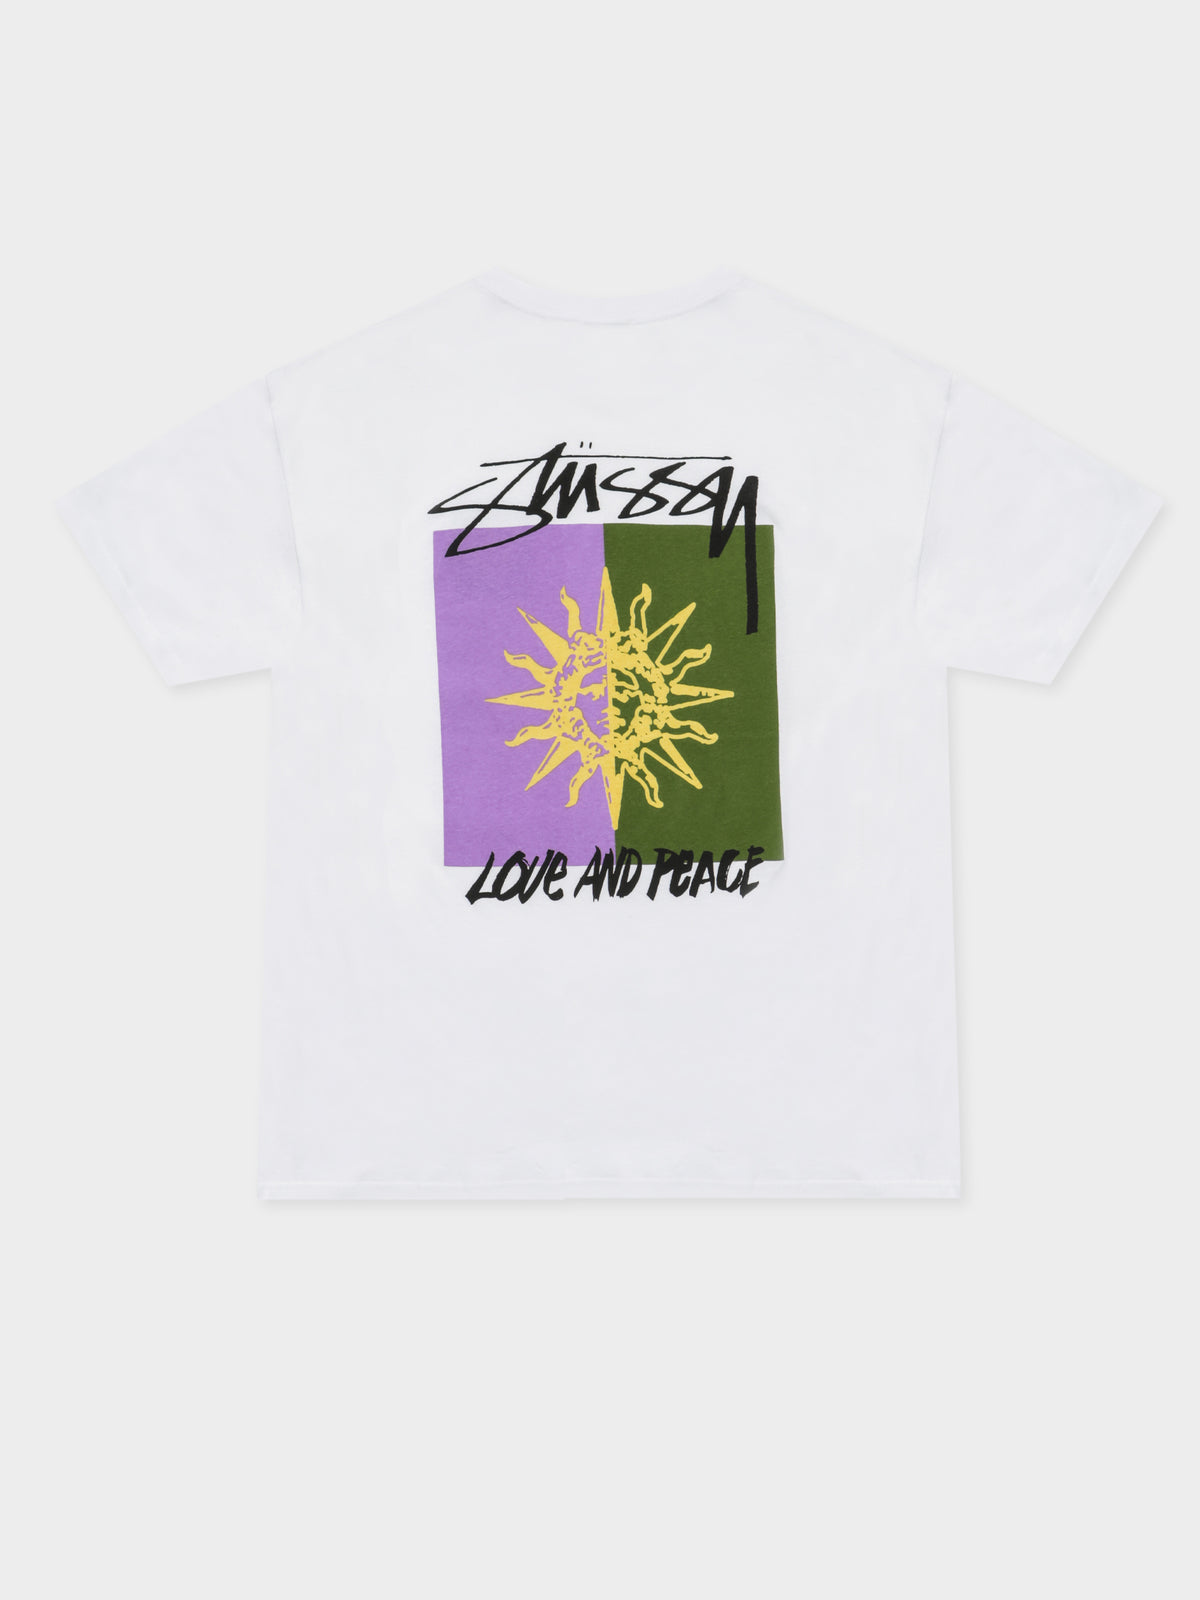 Sunsets Relaxed T-Shirt in White